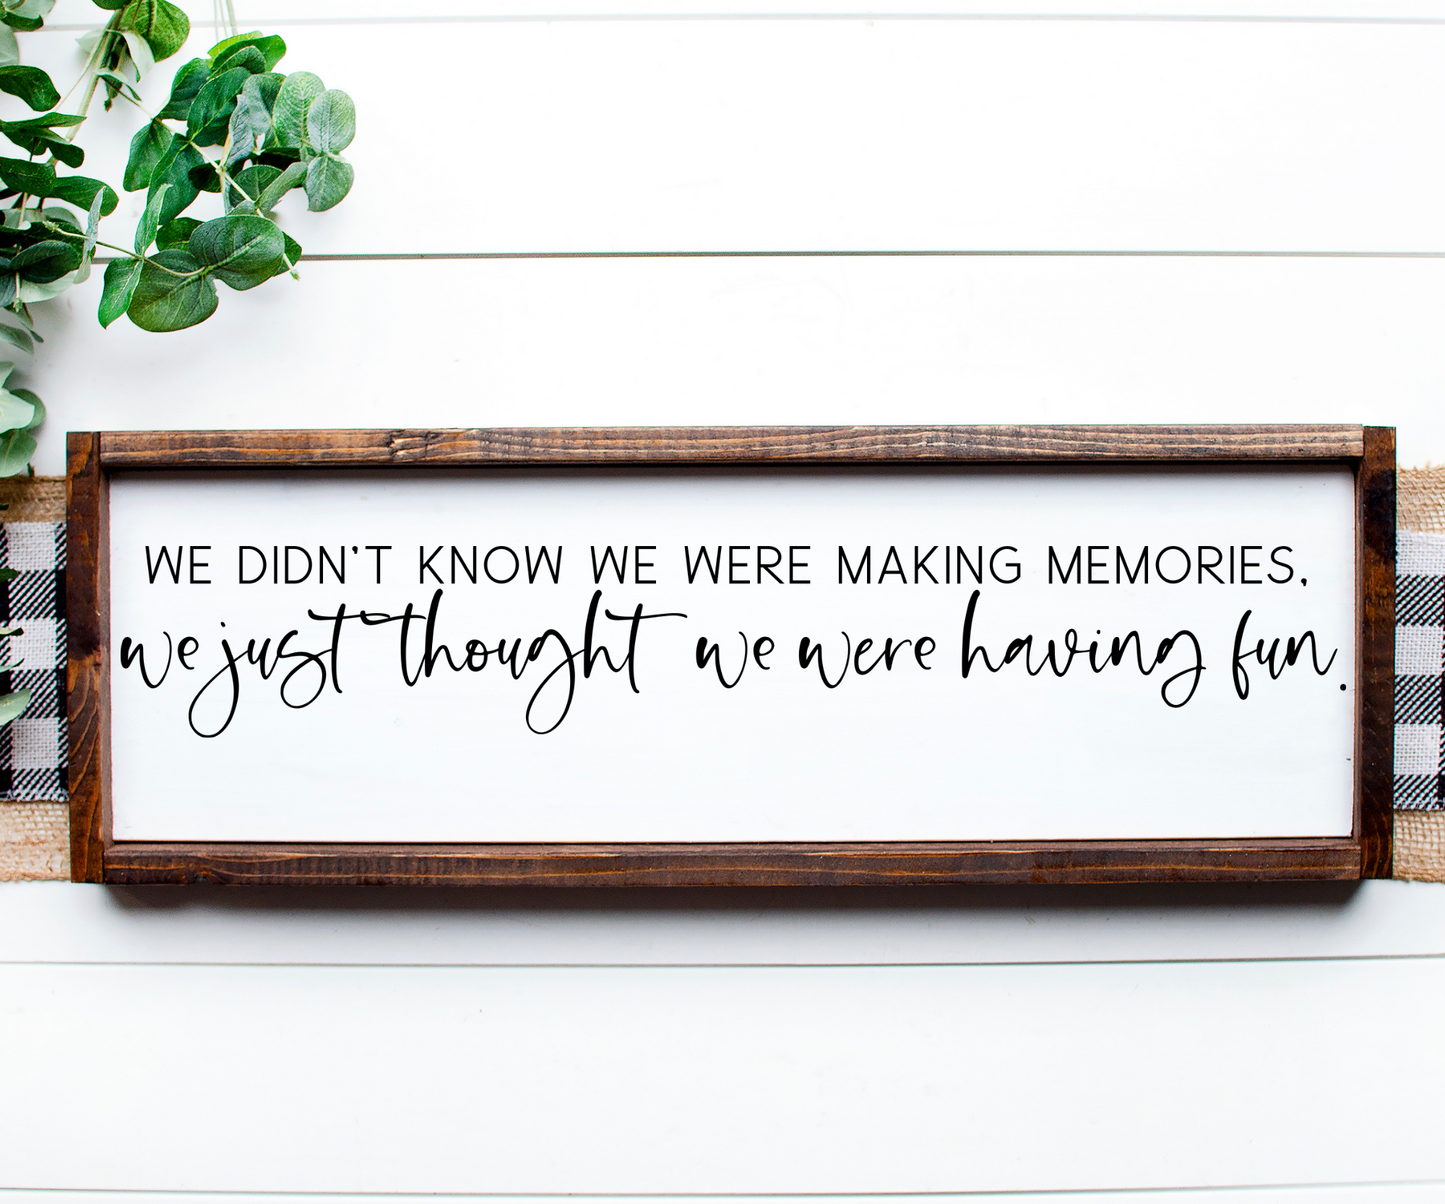 "I didn't know we were making memories"